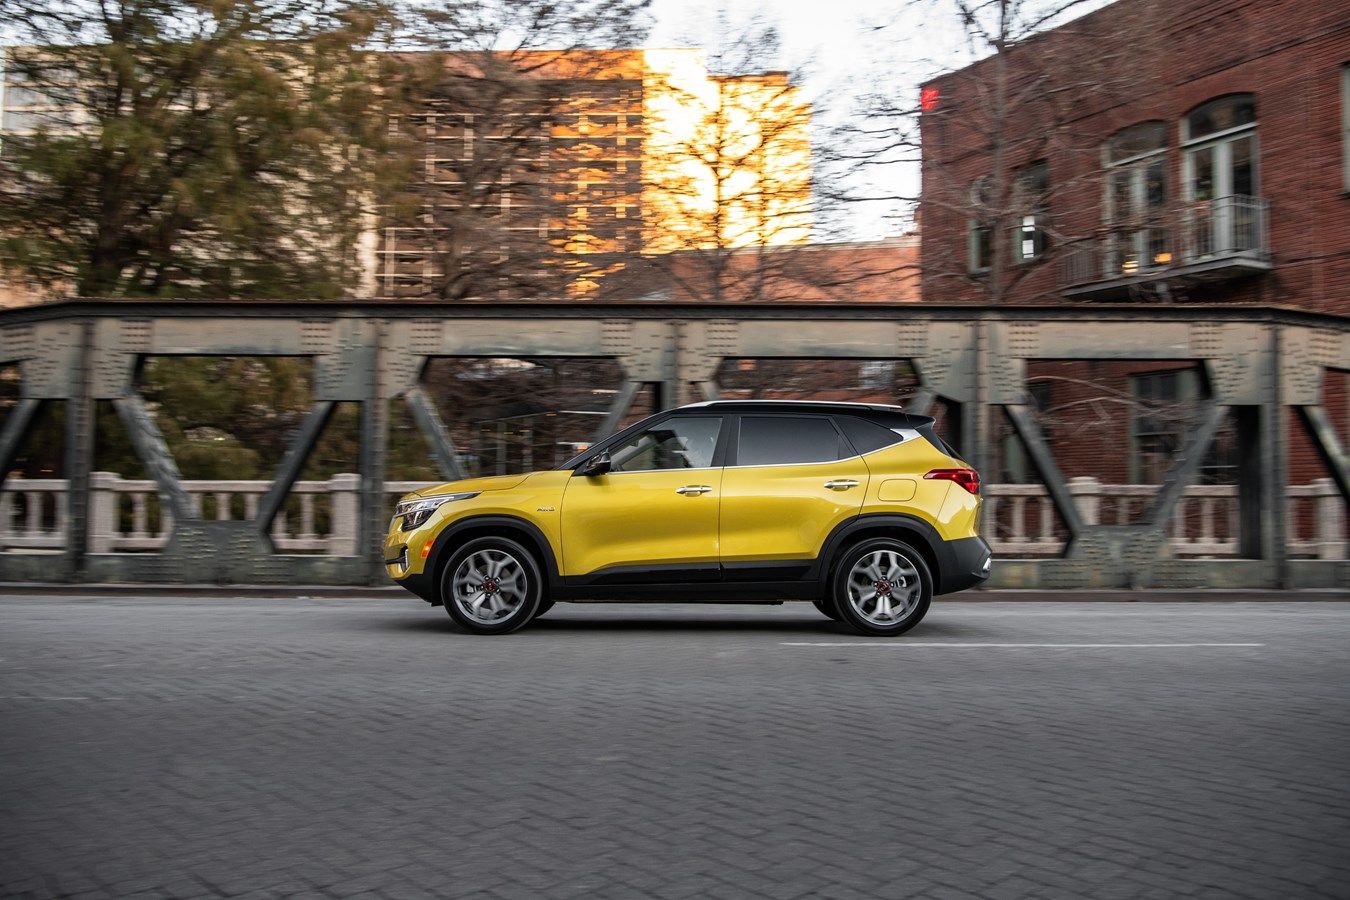 5 Reasons The First Half Of 2021 Was Kia Canada's Most Successful First Half Ever